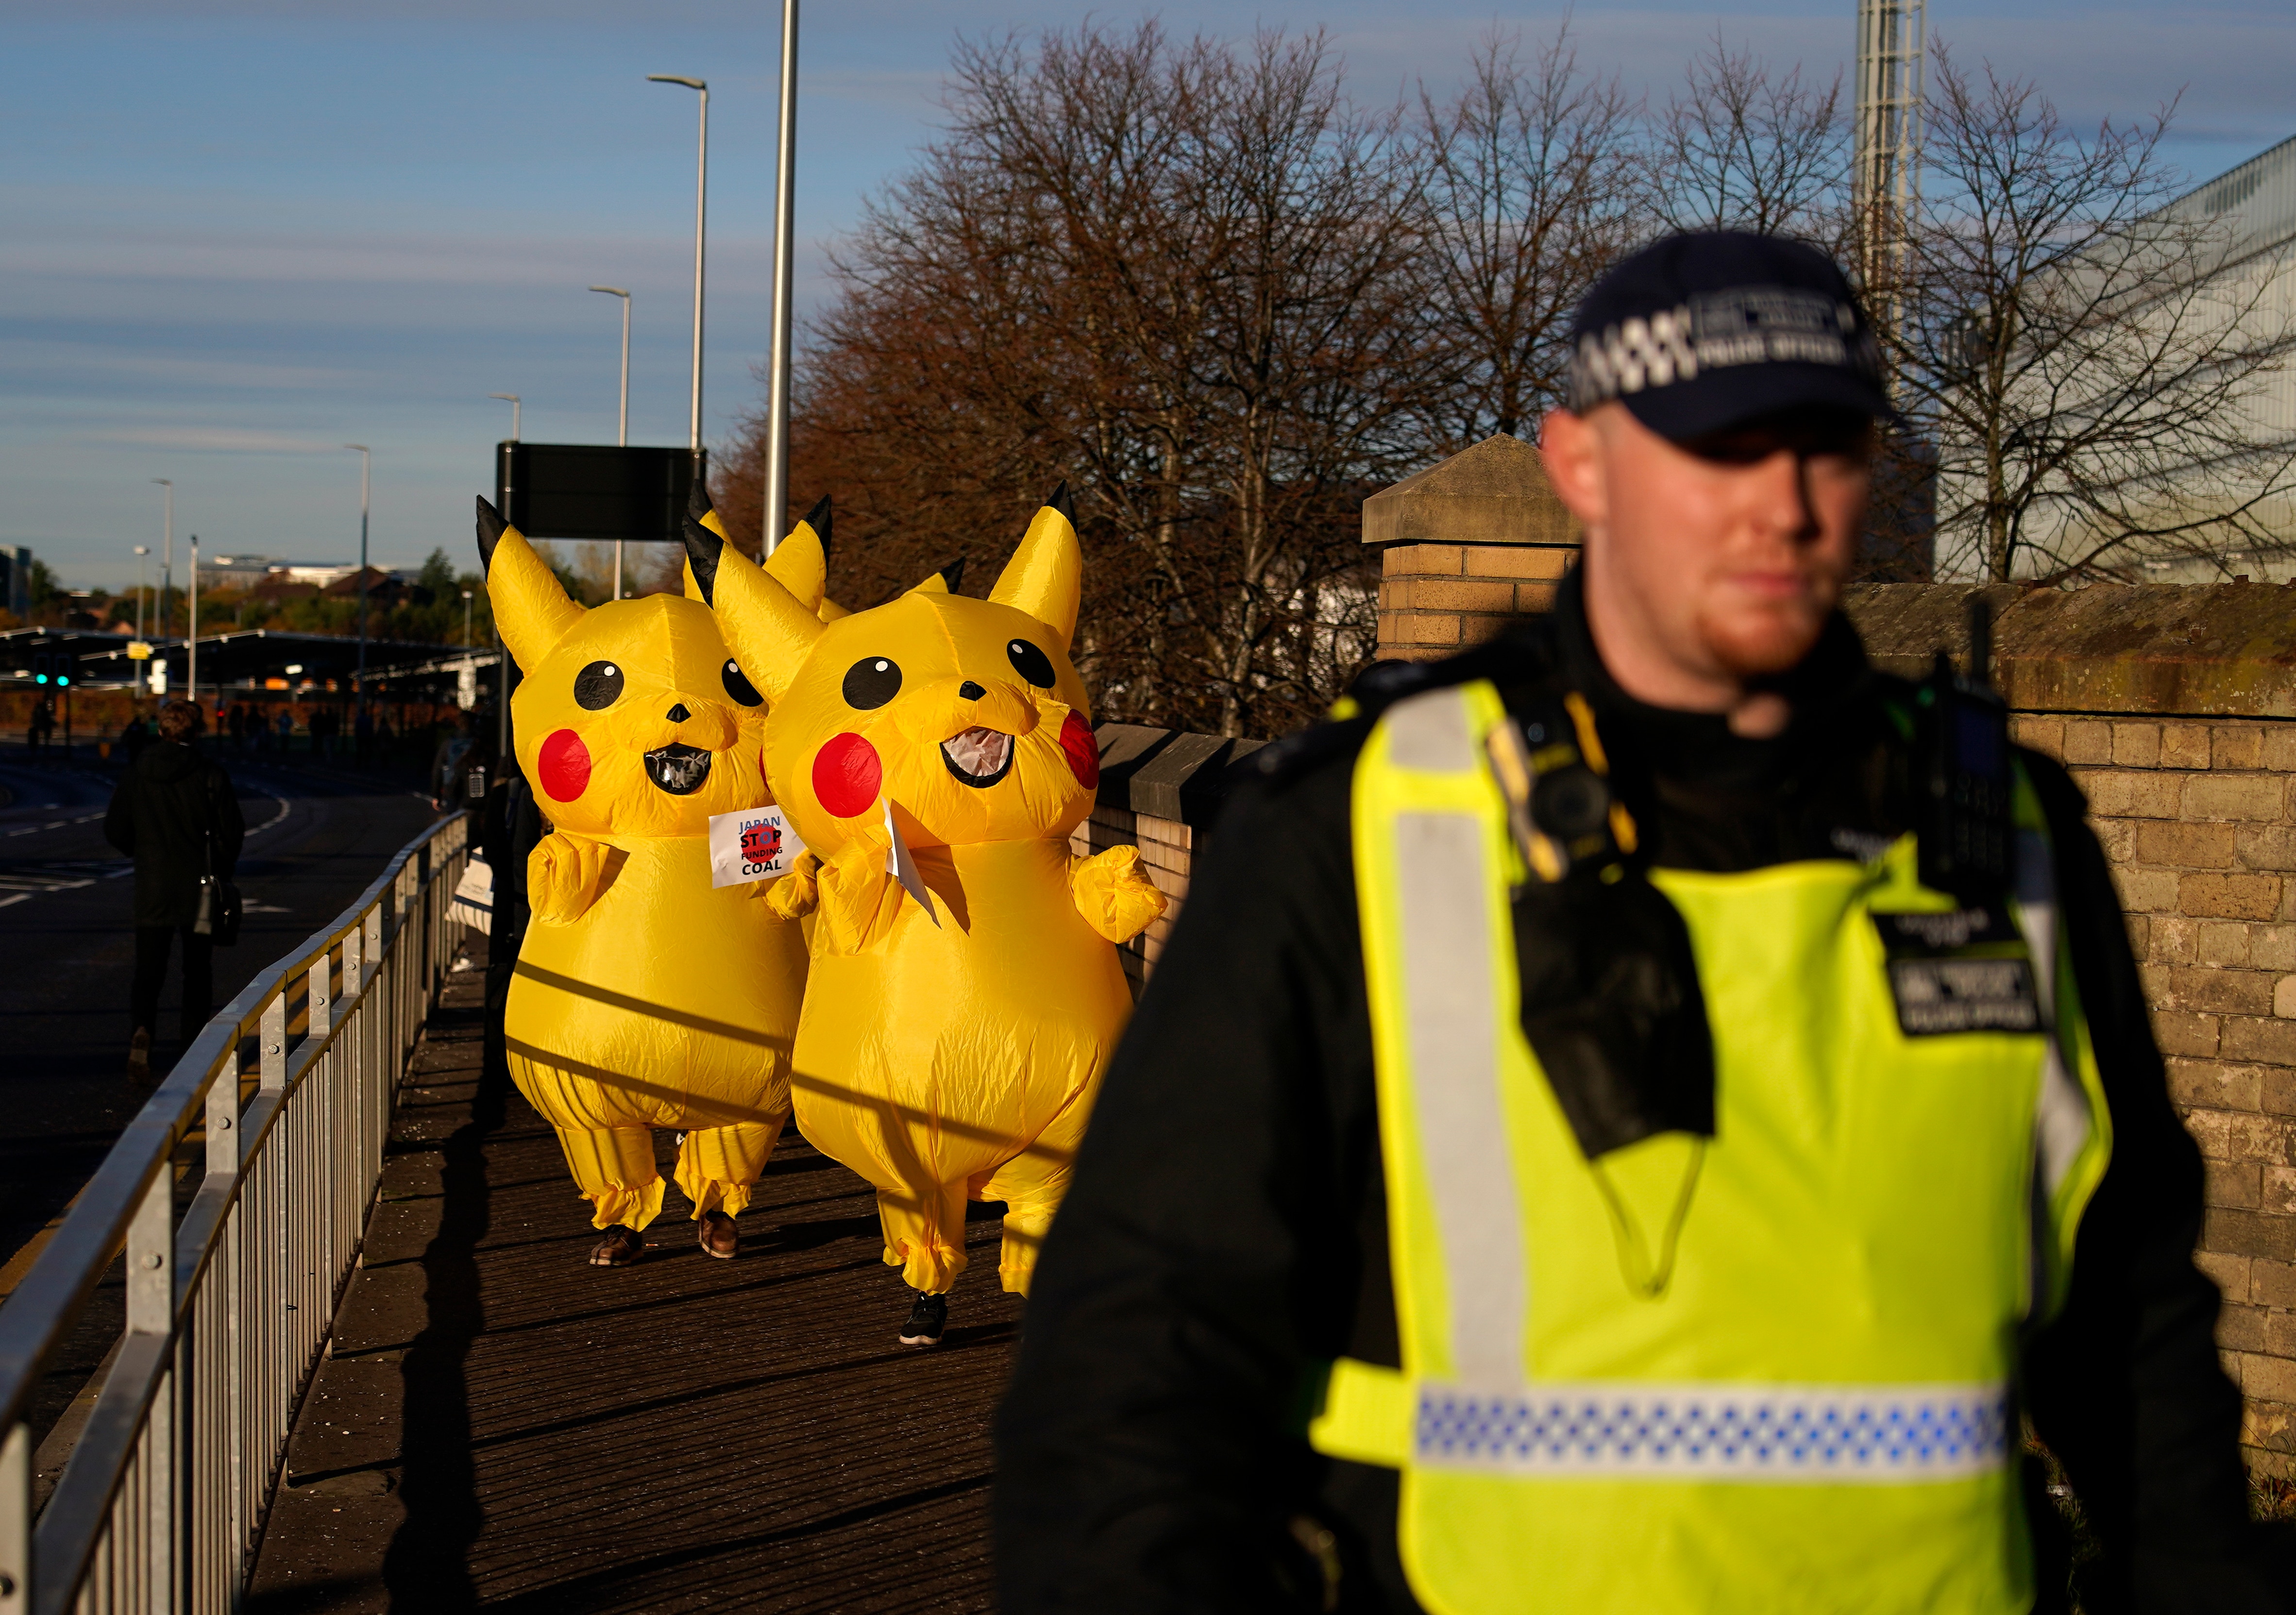 Activists dressed as the Pokemon character Pikachu protesting against Japan's support of the coal industry at the COP26 summit in Glasgow.